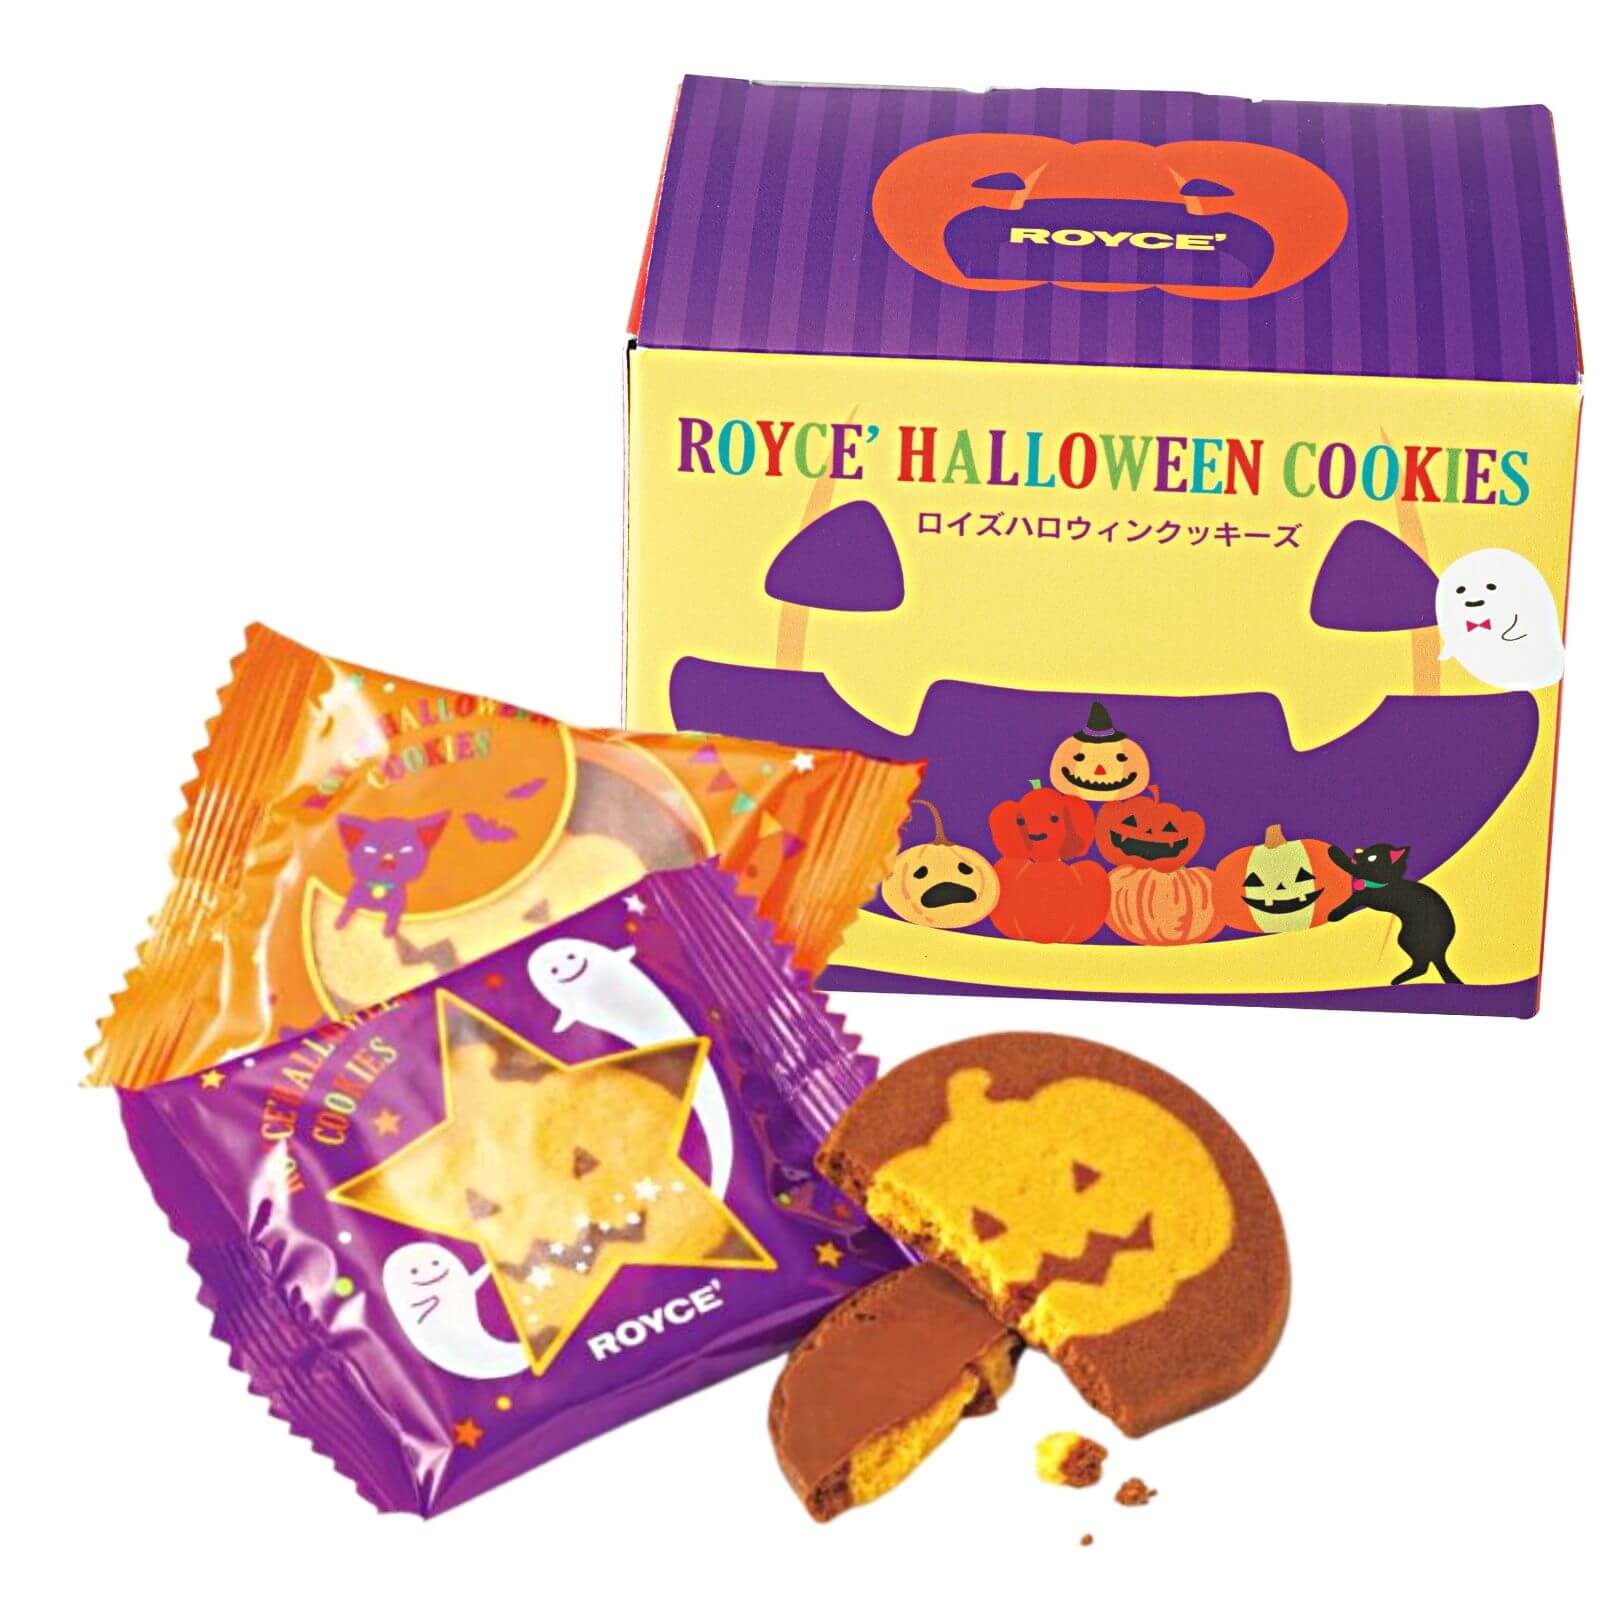 Image shows box on the right in colors of yellow, violet, and orange with various prints of pumpkins, ghosts, bats, a cat, triangular party props, and stripes. Text says ROYCE' Halloween Cookies ROYCE'. Left part shows cookies with orange and violet wrappings with illustrations of a cat and ghosts. There is also a crumbled cookie in yellow and brown with a pumpkin illustration with smiley face. Background is in color white.